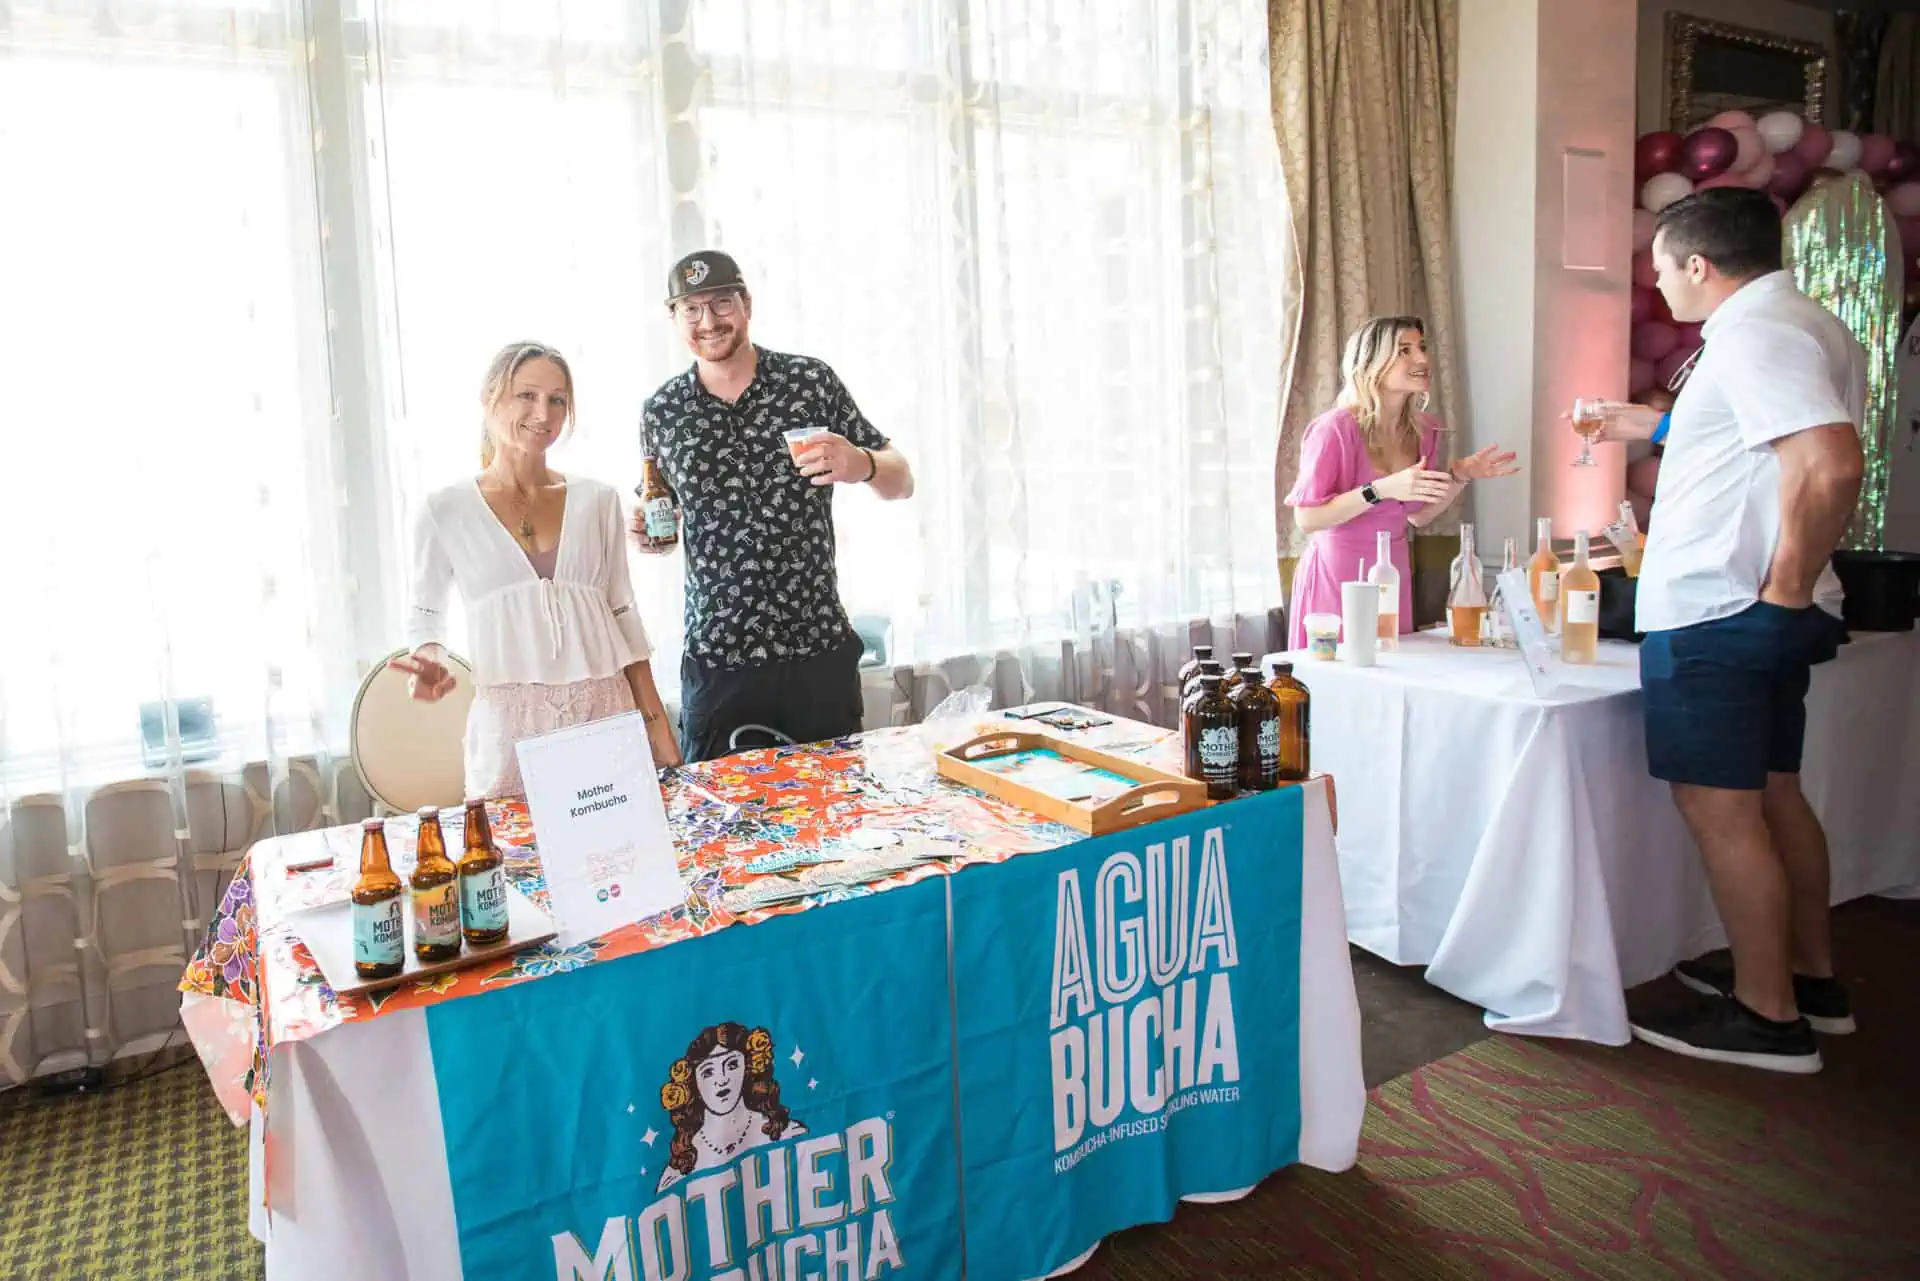 Mother Kombucha's table at Rose by the bay